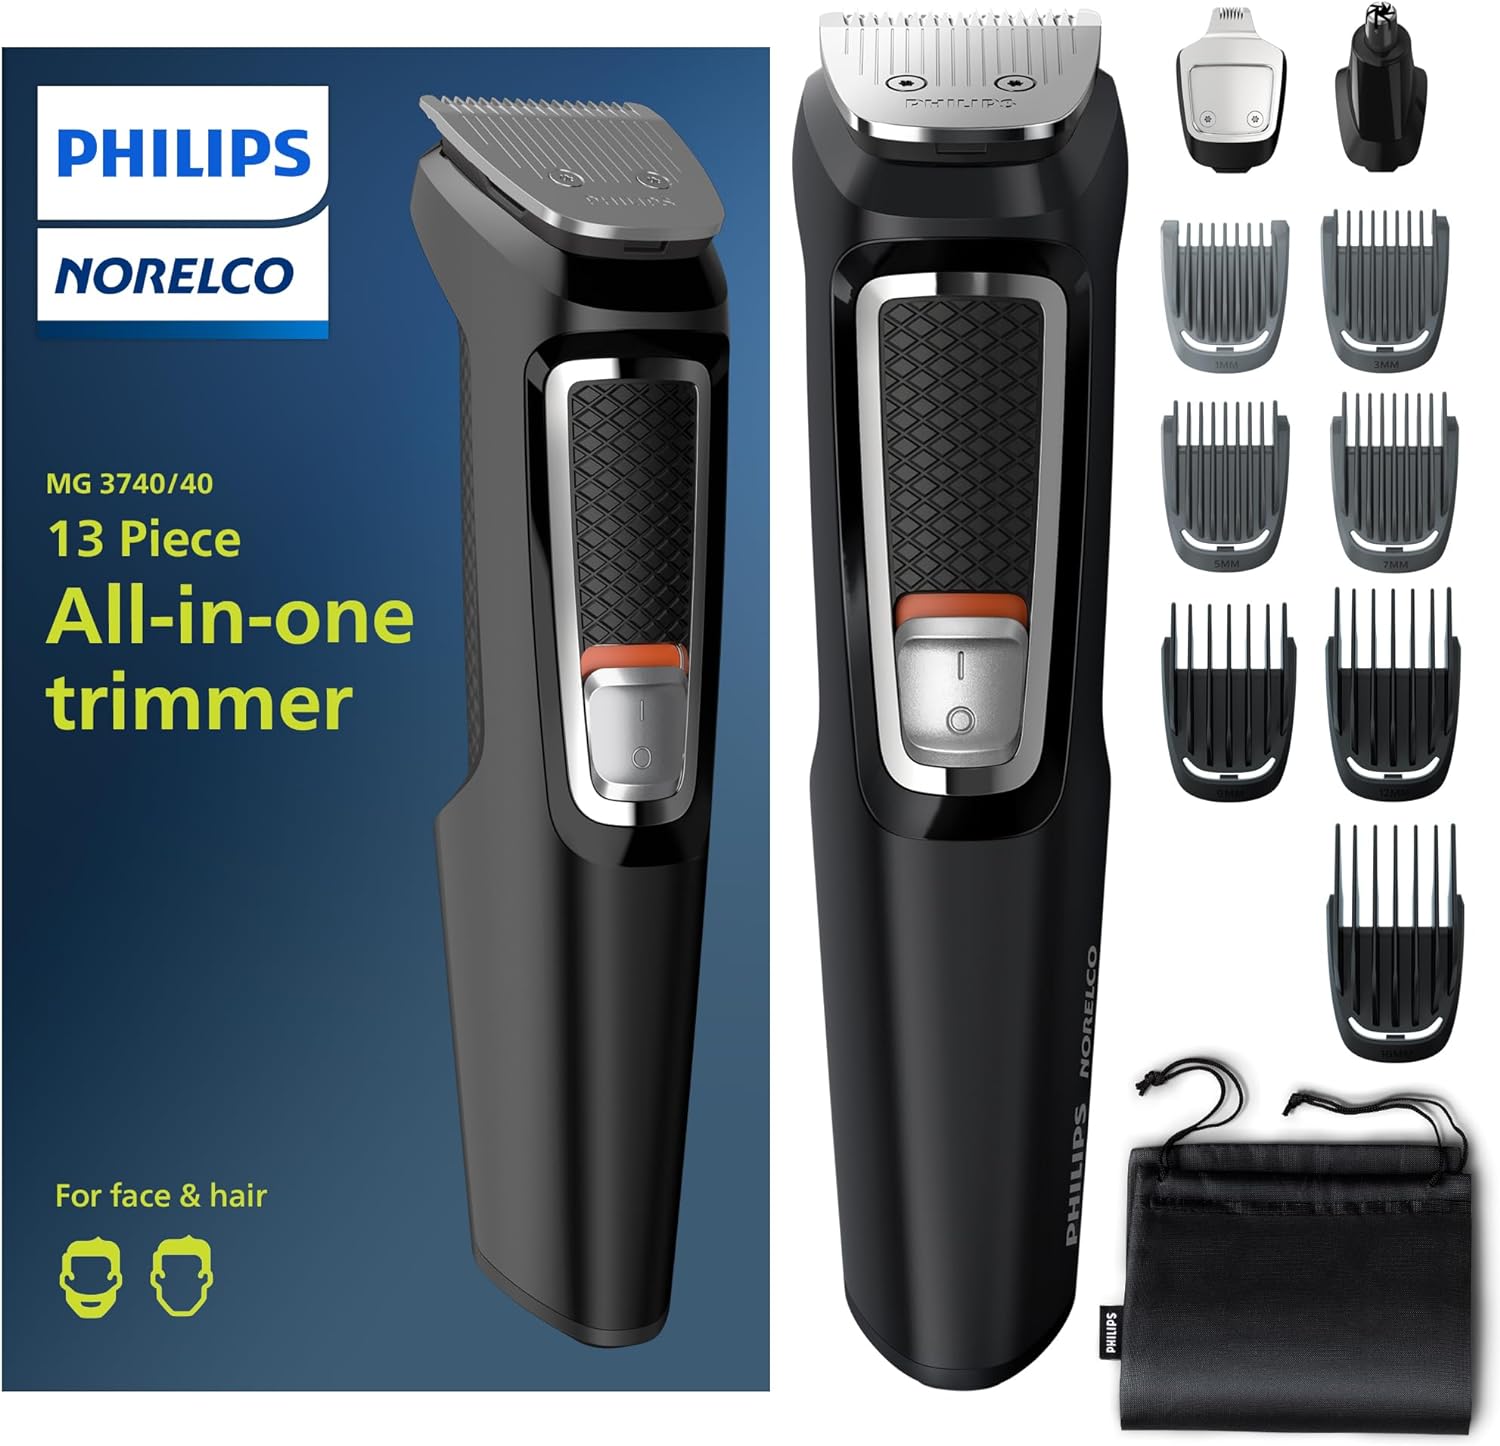 Multi Groomer All-In-One Trimmer Series 3000-13 Piece Mens Grooming Kit for Beard, Face, Nose, Ear Hair Trimmer and Hair Clipper - NO Blade Oil Needed, MG3740/40